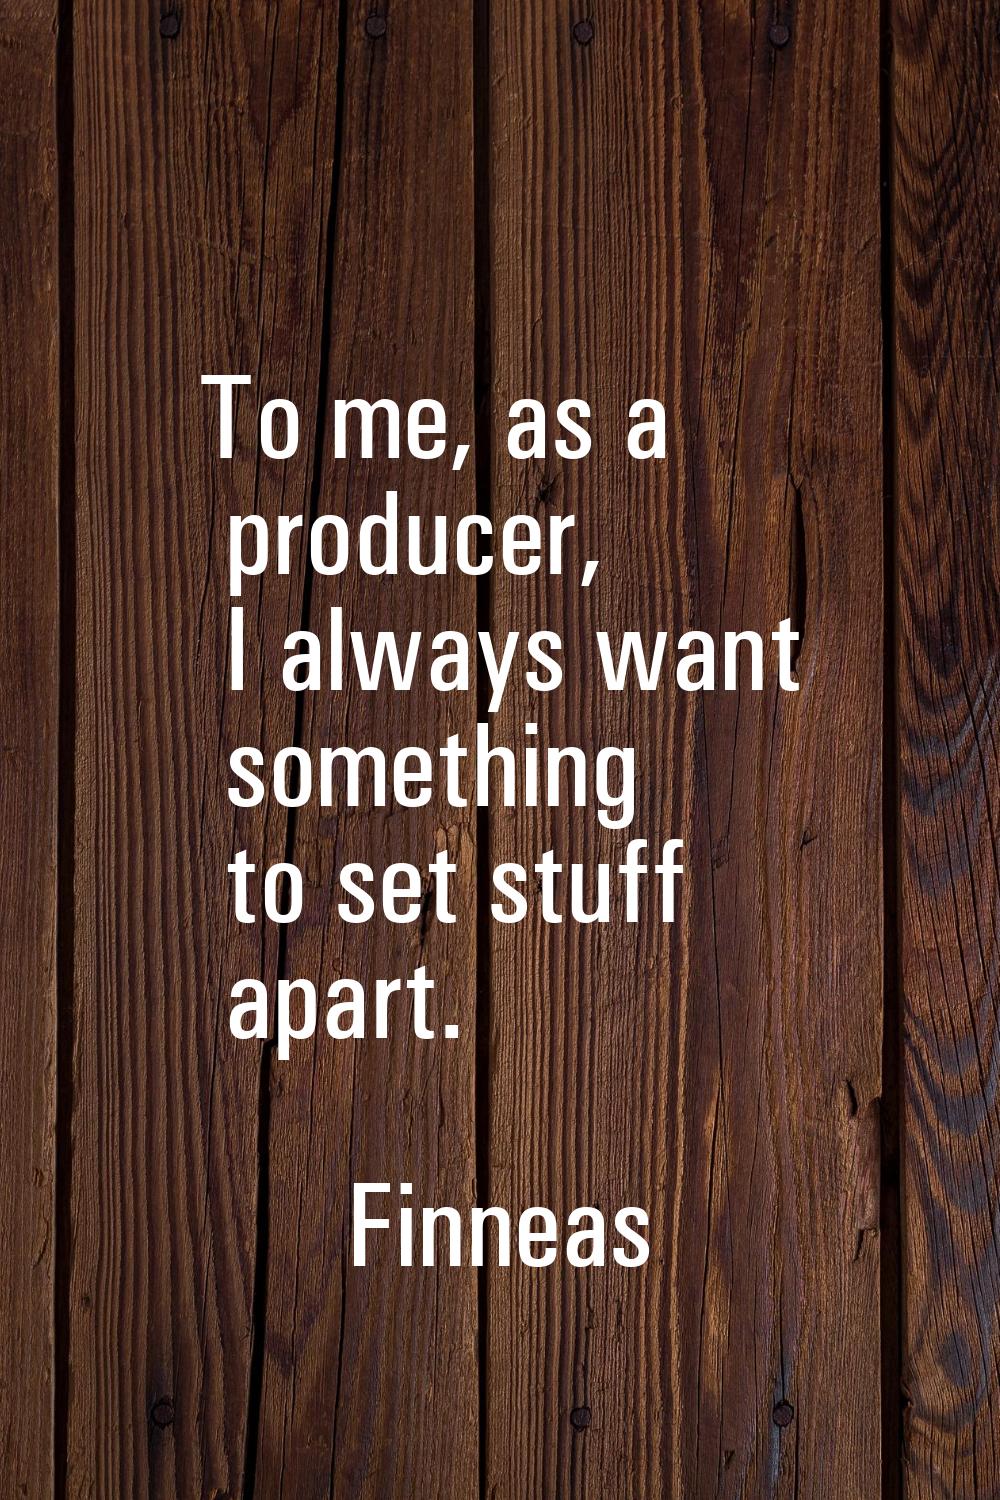 To me, as a producer, I always want something to set stuff apart.